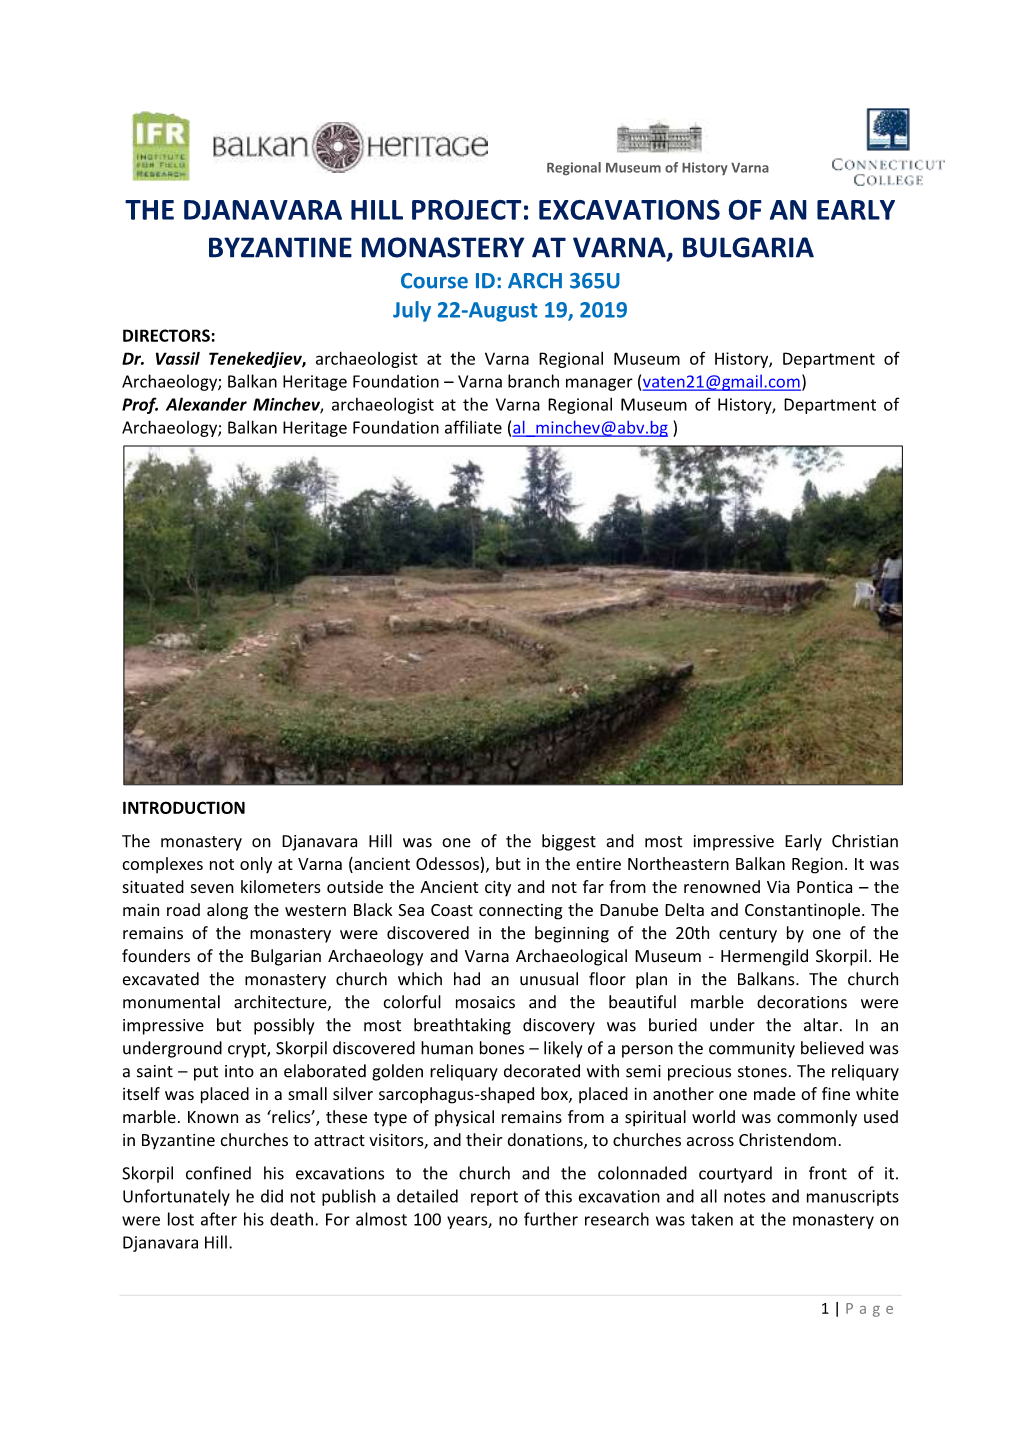 THE DJANAVARA HILL PROJECT: EXCAVATIONS of an EARLY BYZANTINE МONASTERY at VARNA, BULGARIA Course ID: ARCH 365U July 22-August 19, 2019 DIRECTORS: Dr